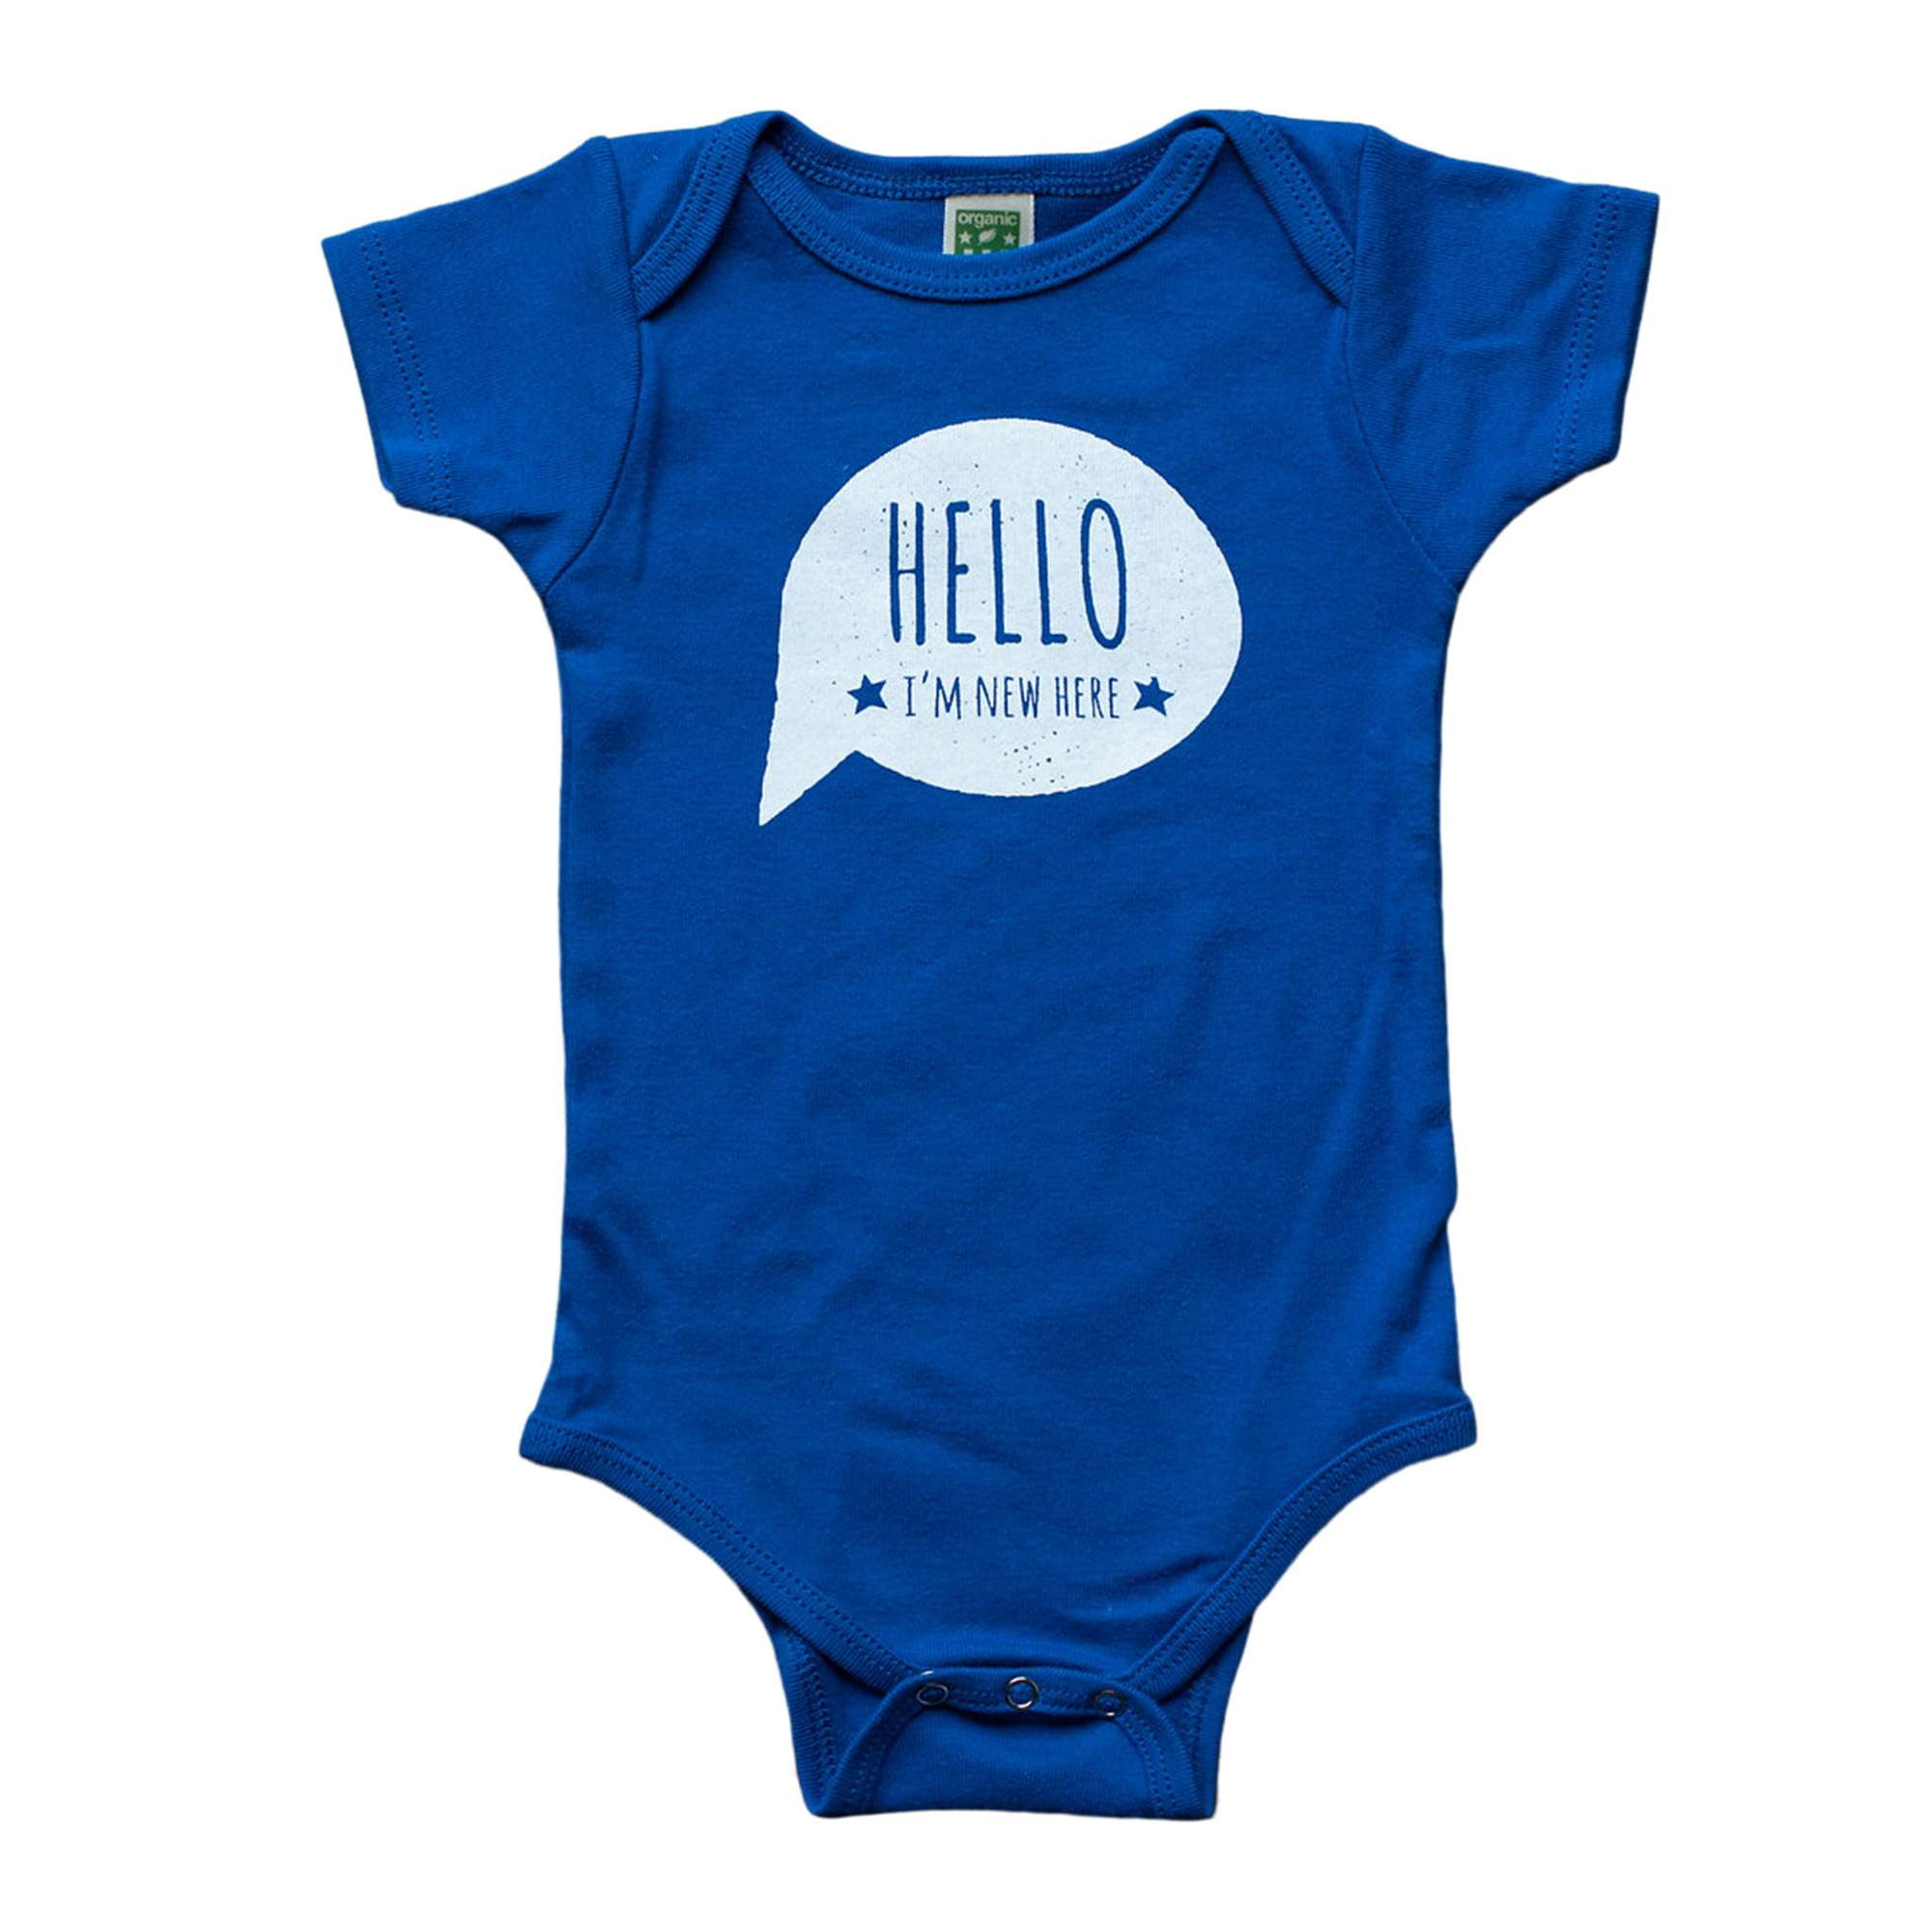 Hello, I'm New Here Baby Bodysuit - Sweetpea and Co.